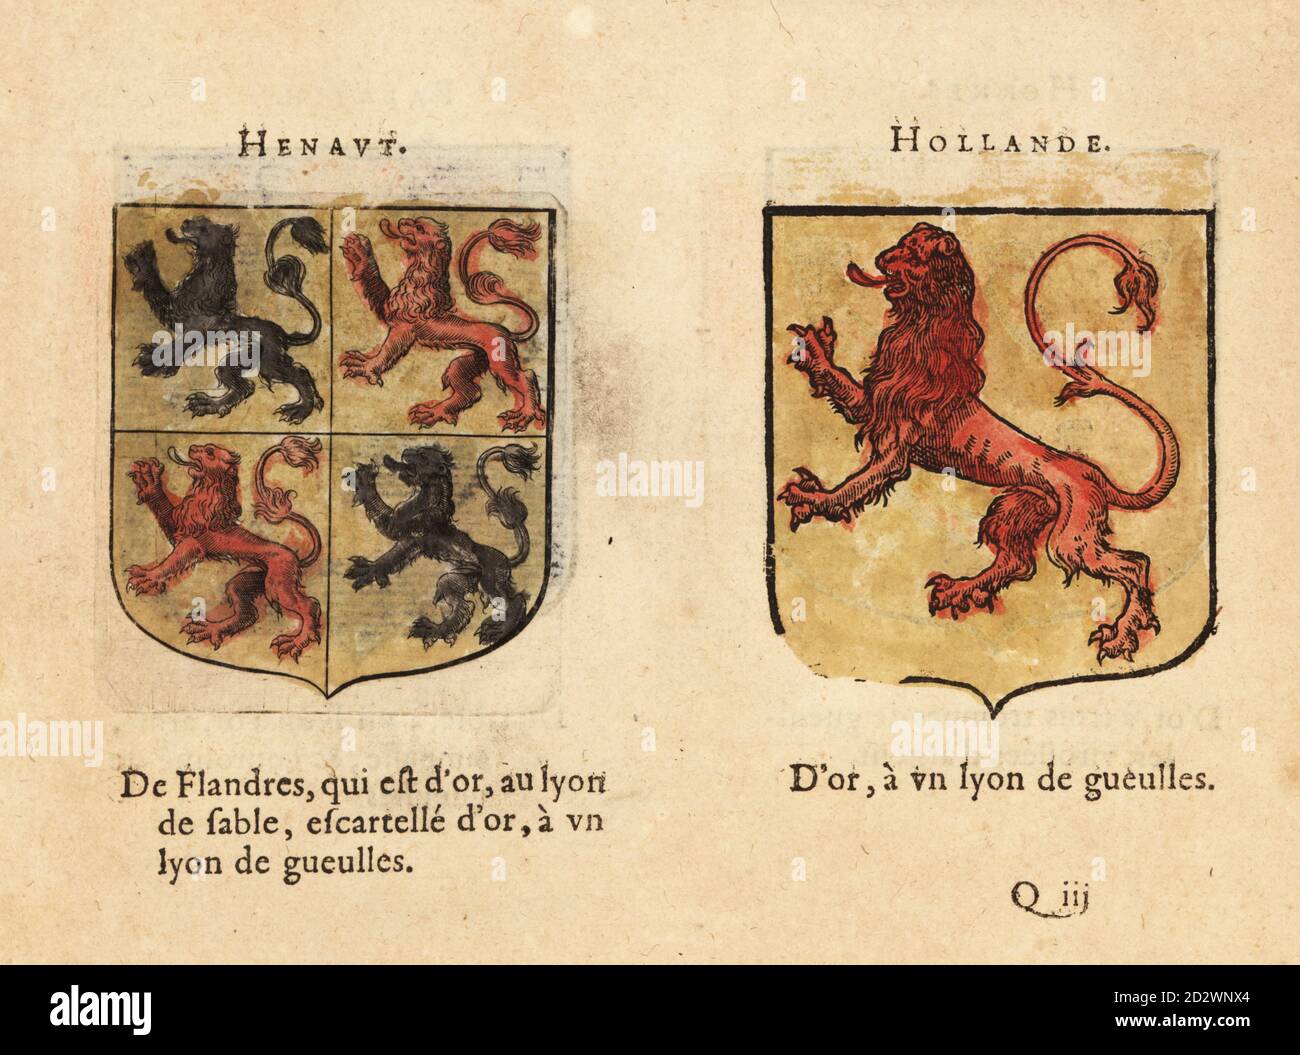 Coat of arms of the Count of Hainaut, Low Countries, black and red lions on gold field, and the Count of Holland, Low Countries, with red lion on gold field. Comtez: Henaut, Hollande. Handcoloured woodblock engraving from Hierosme de Bara’s Le Blason des Armoiries, Chez Rolet Boutonne, Paris, 1628 Stock Photo